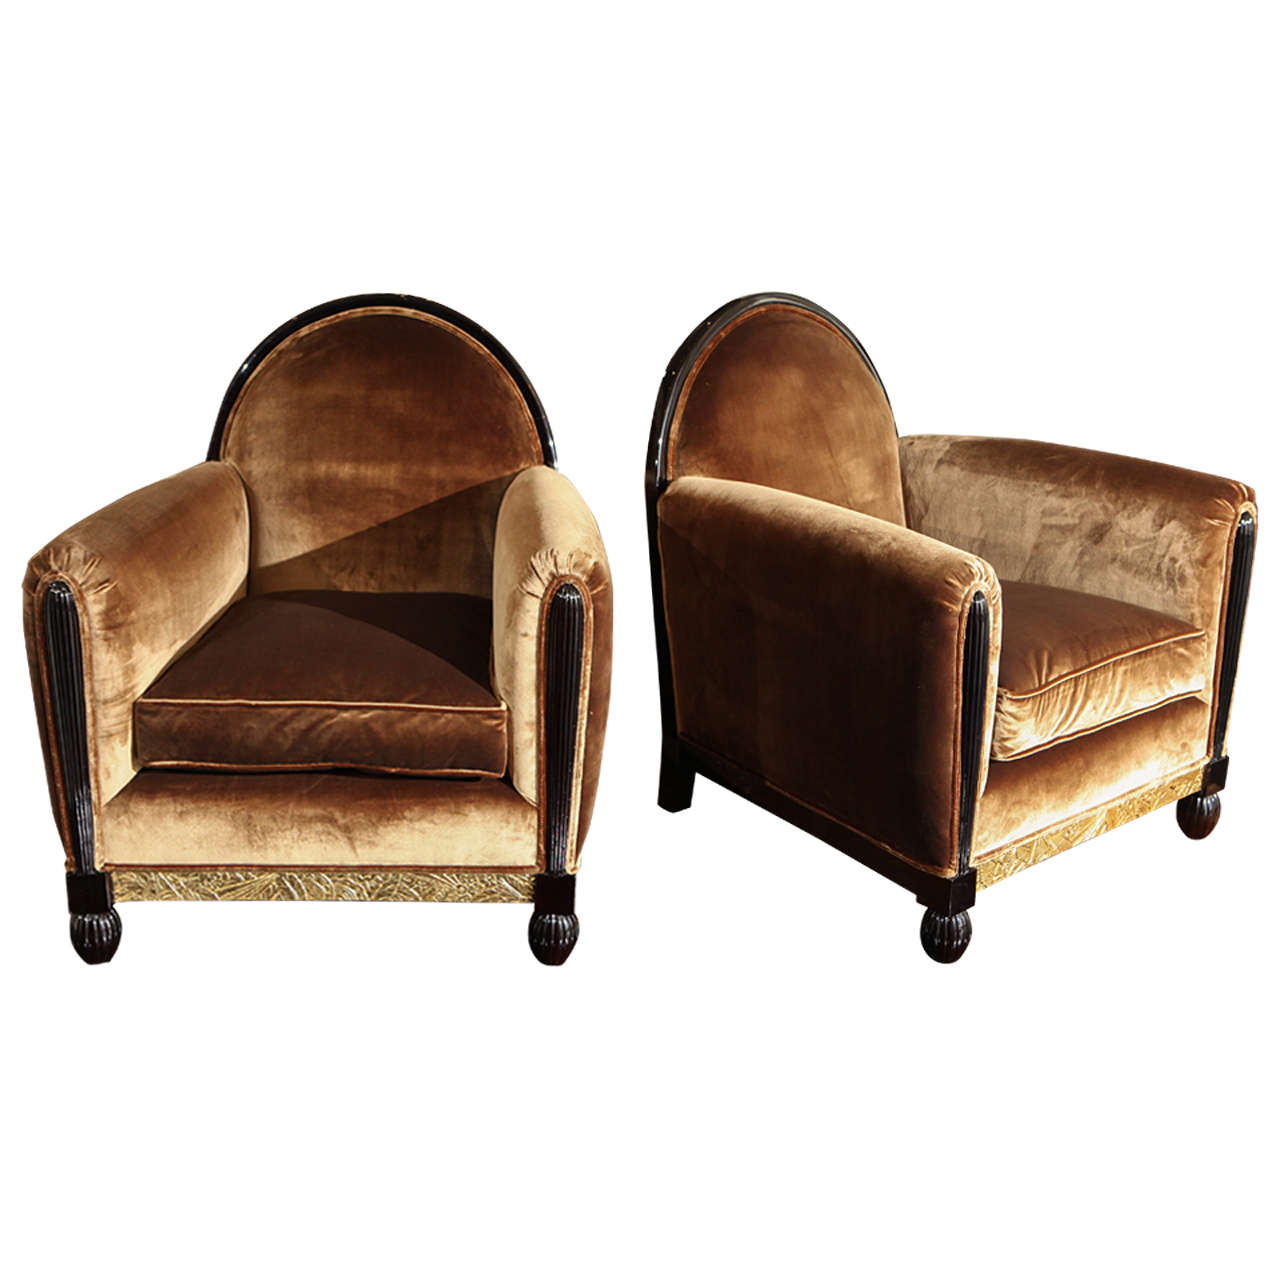 Pair of Salon Chairs attributed to Maurice Dufrene